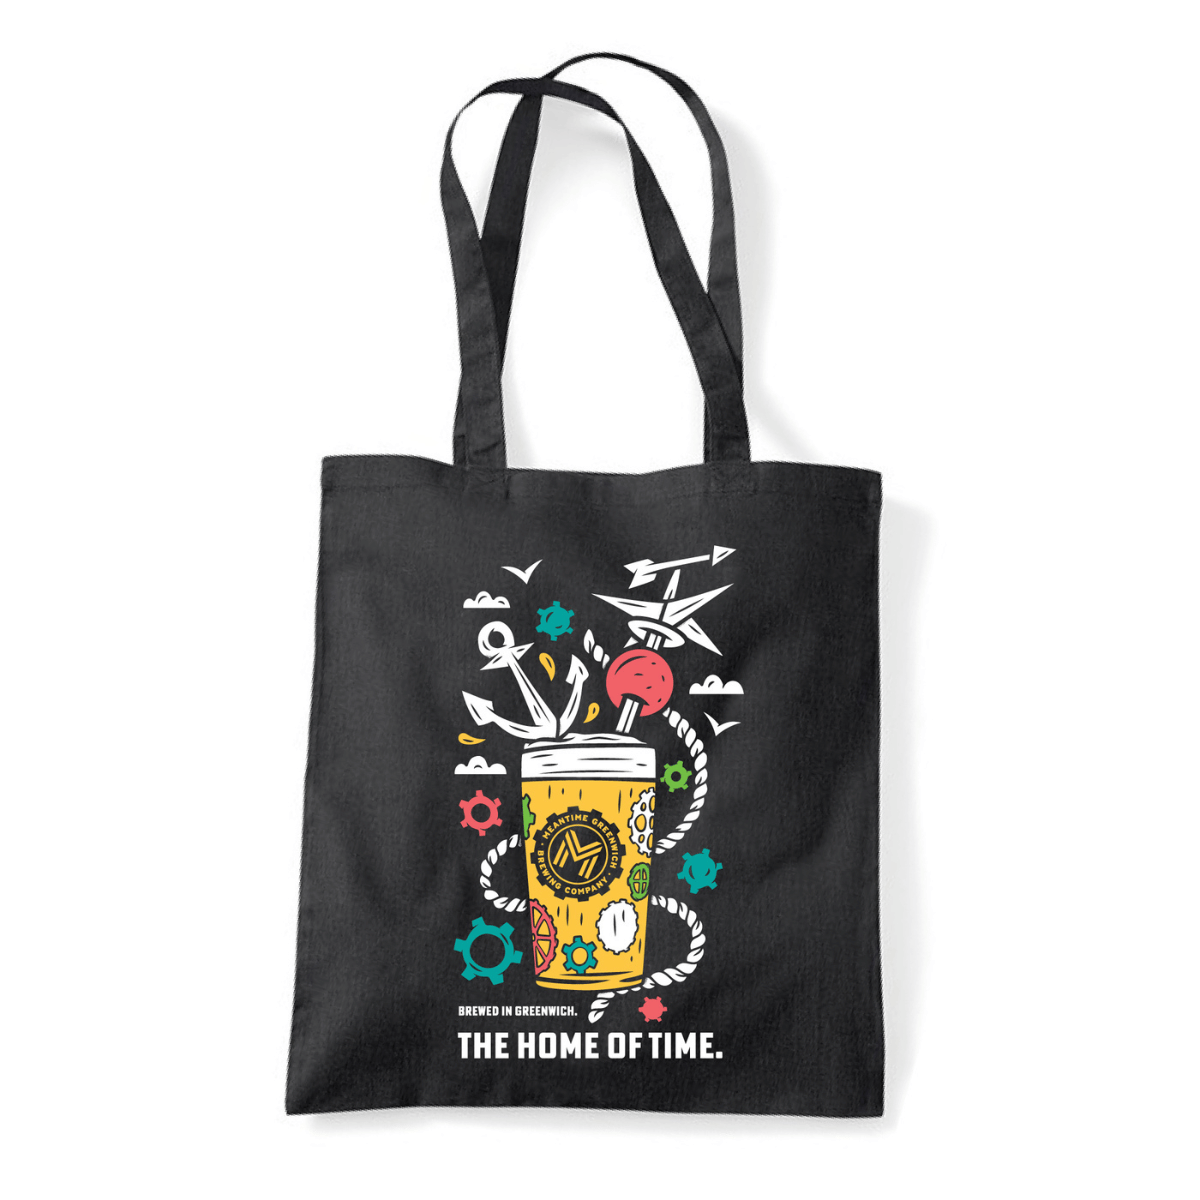 Meantime Home of Time Tote Bag